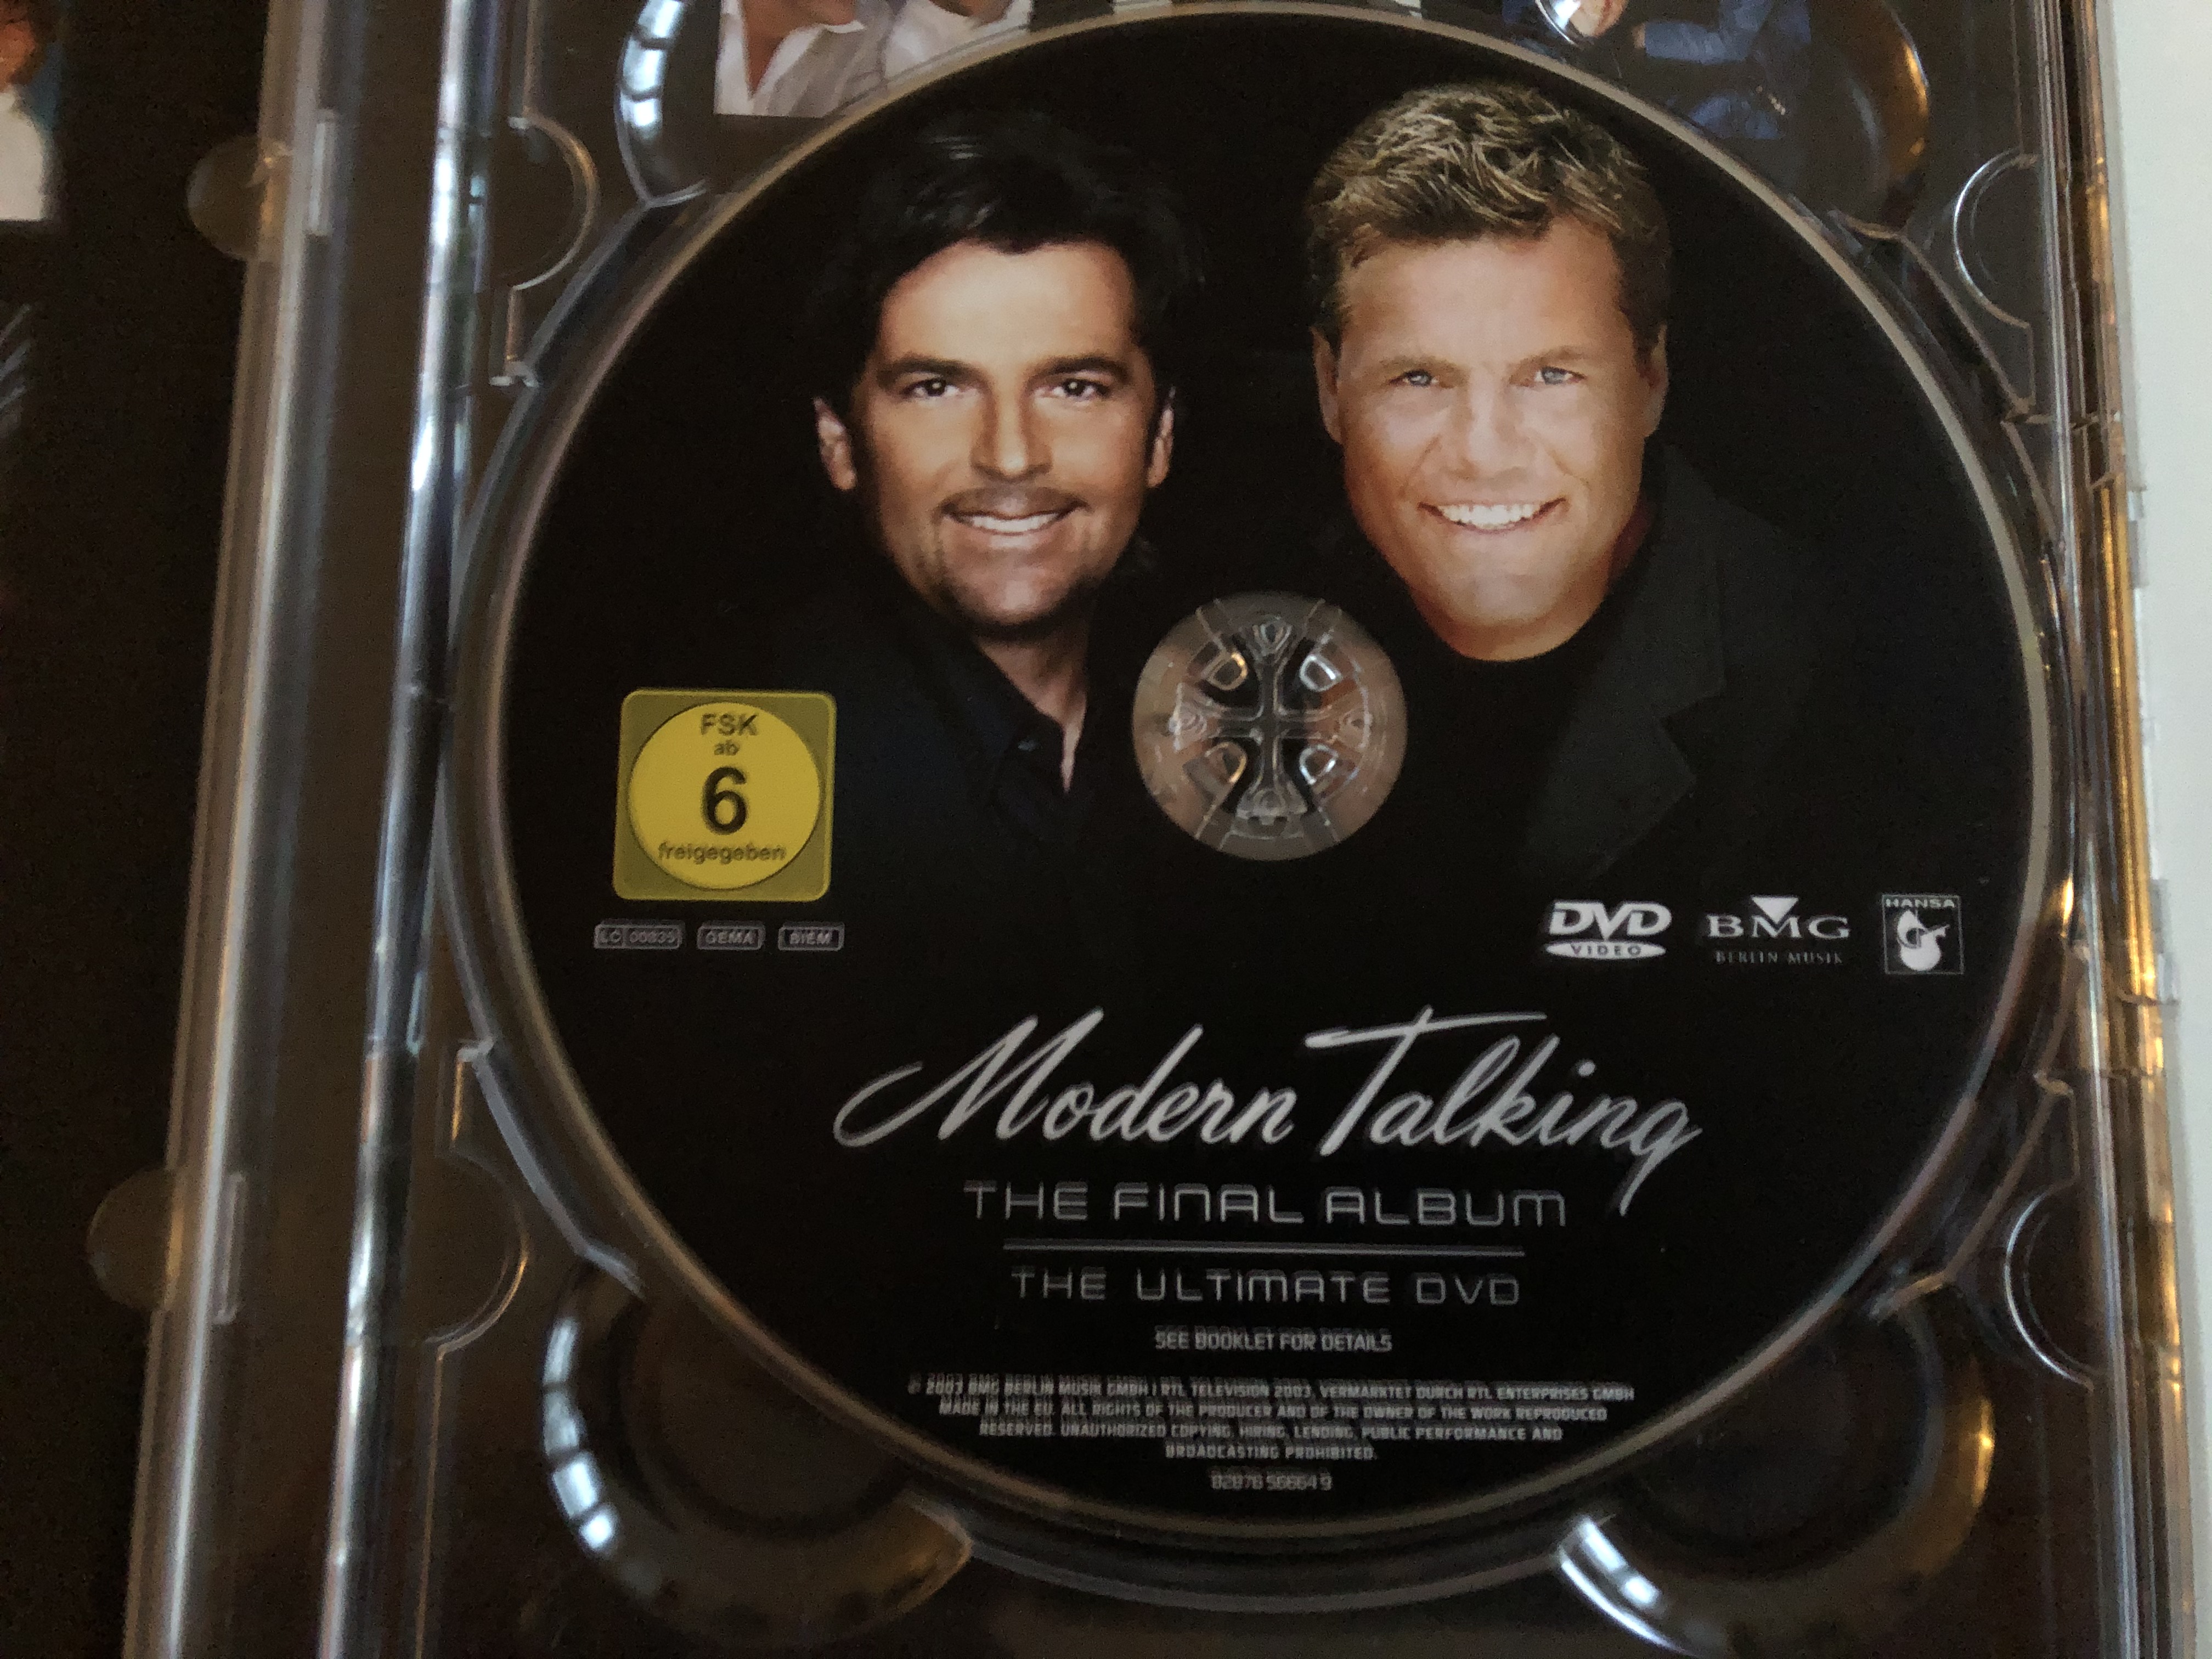 Modern Talking - The final Album - The Ultimate DVD 2003 / Alle Videoclips  in Dolby Digital 5.1 / Plus Jede menge Bonusmaterial - Bible in My Language